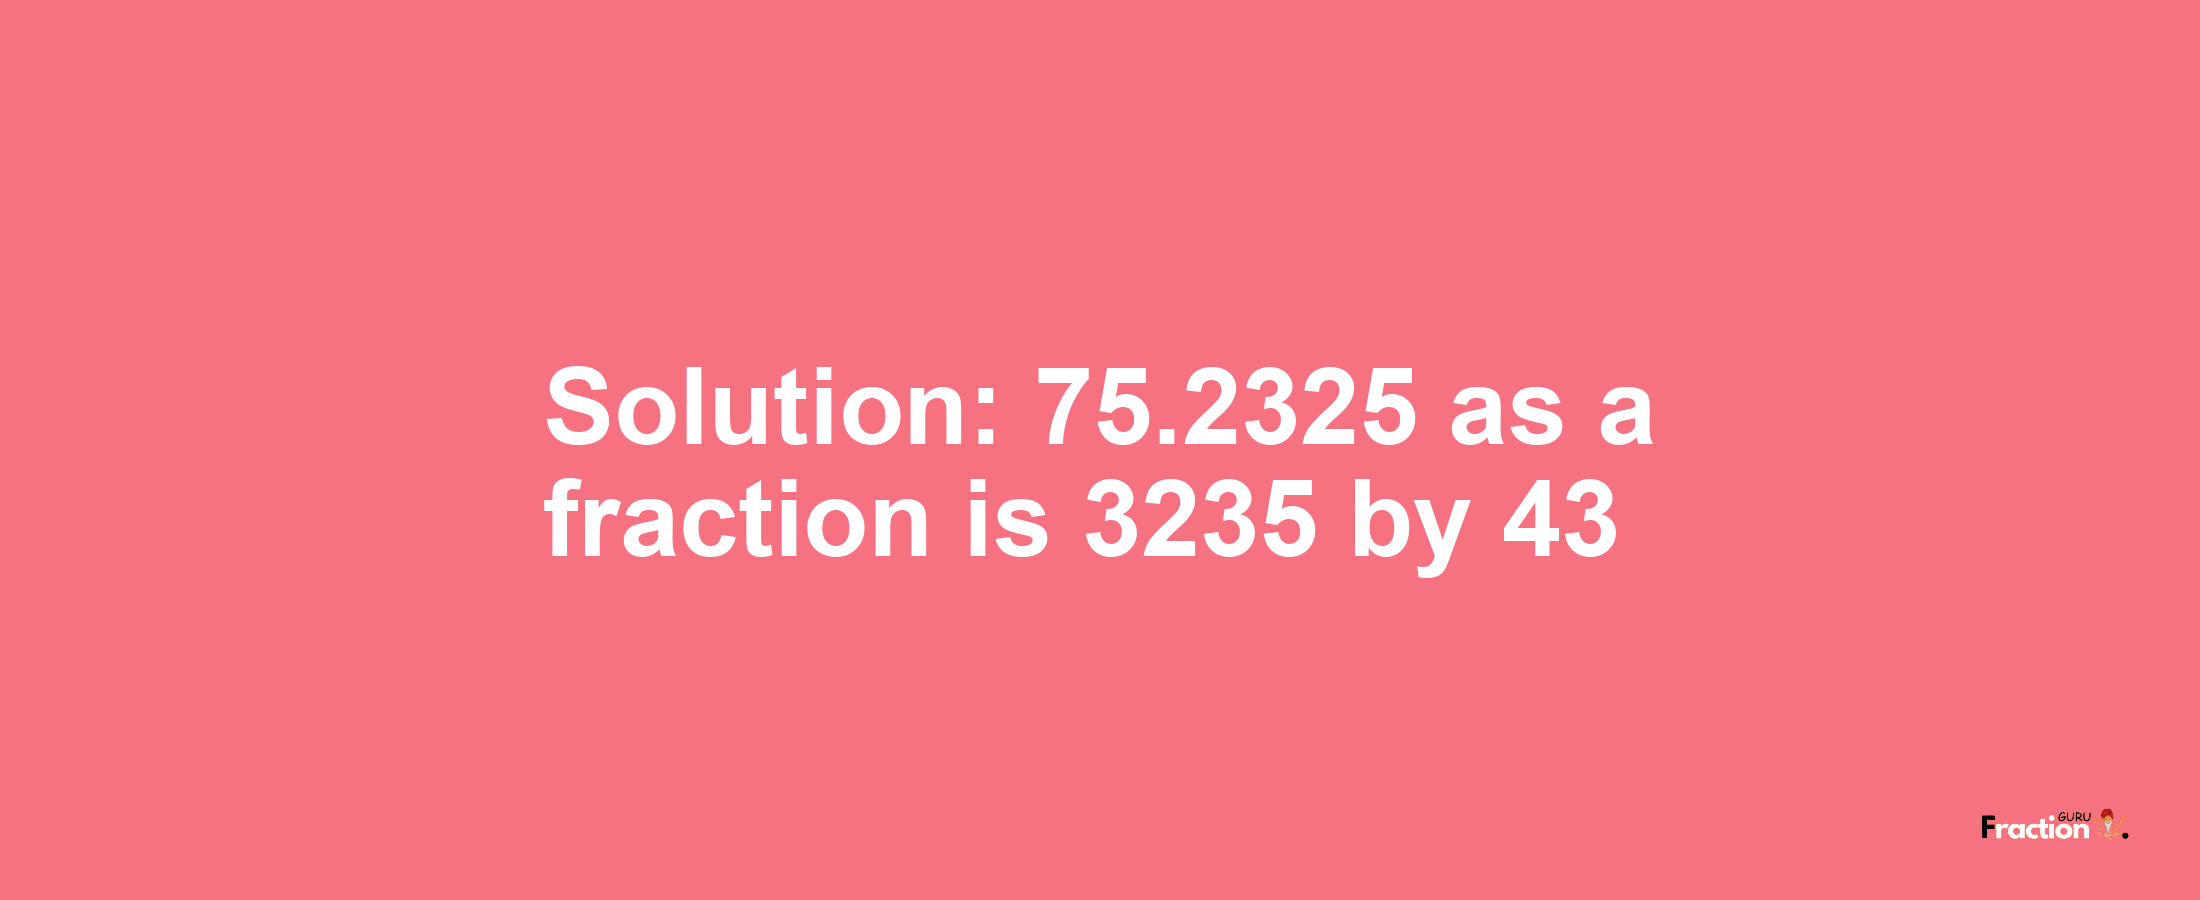 Solution:75.2325 as a fraction is 3235/43